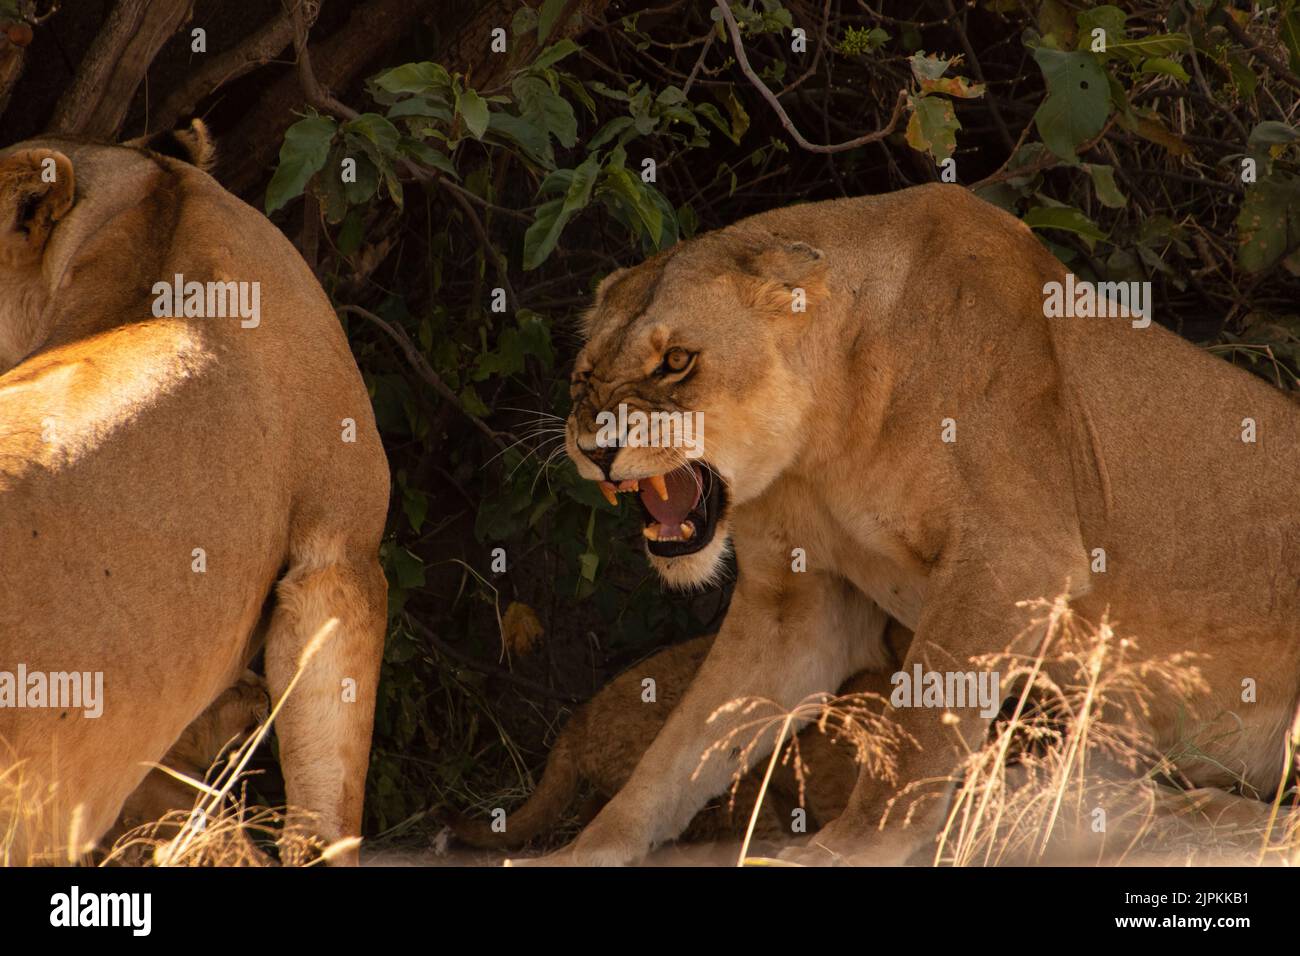 A lioness snarling at another lion with leaves and trees in hte backgournd Stock Photo